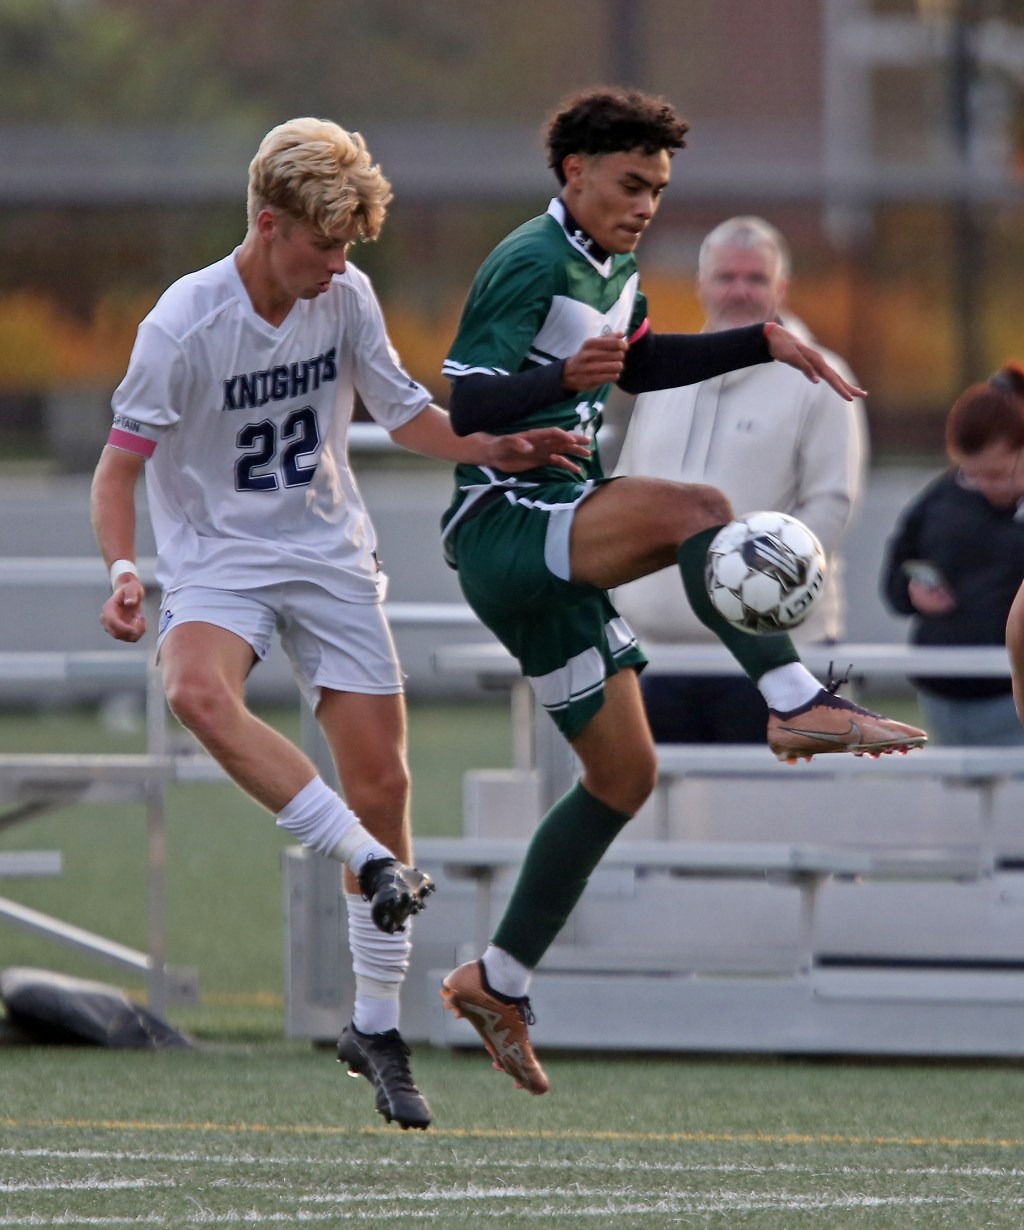 webnexttech | MIAA statewide boys soccer tournament pairings